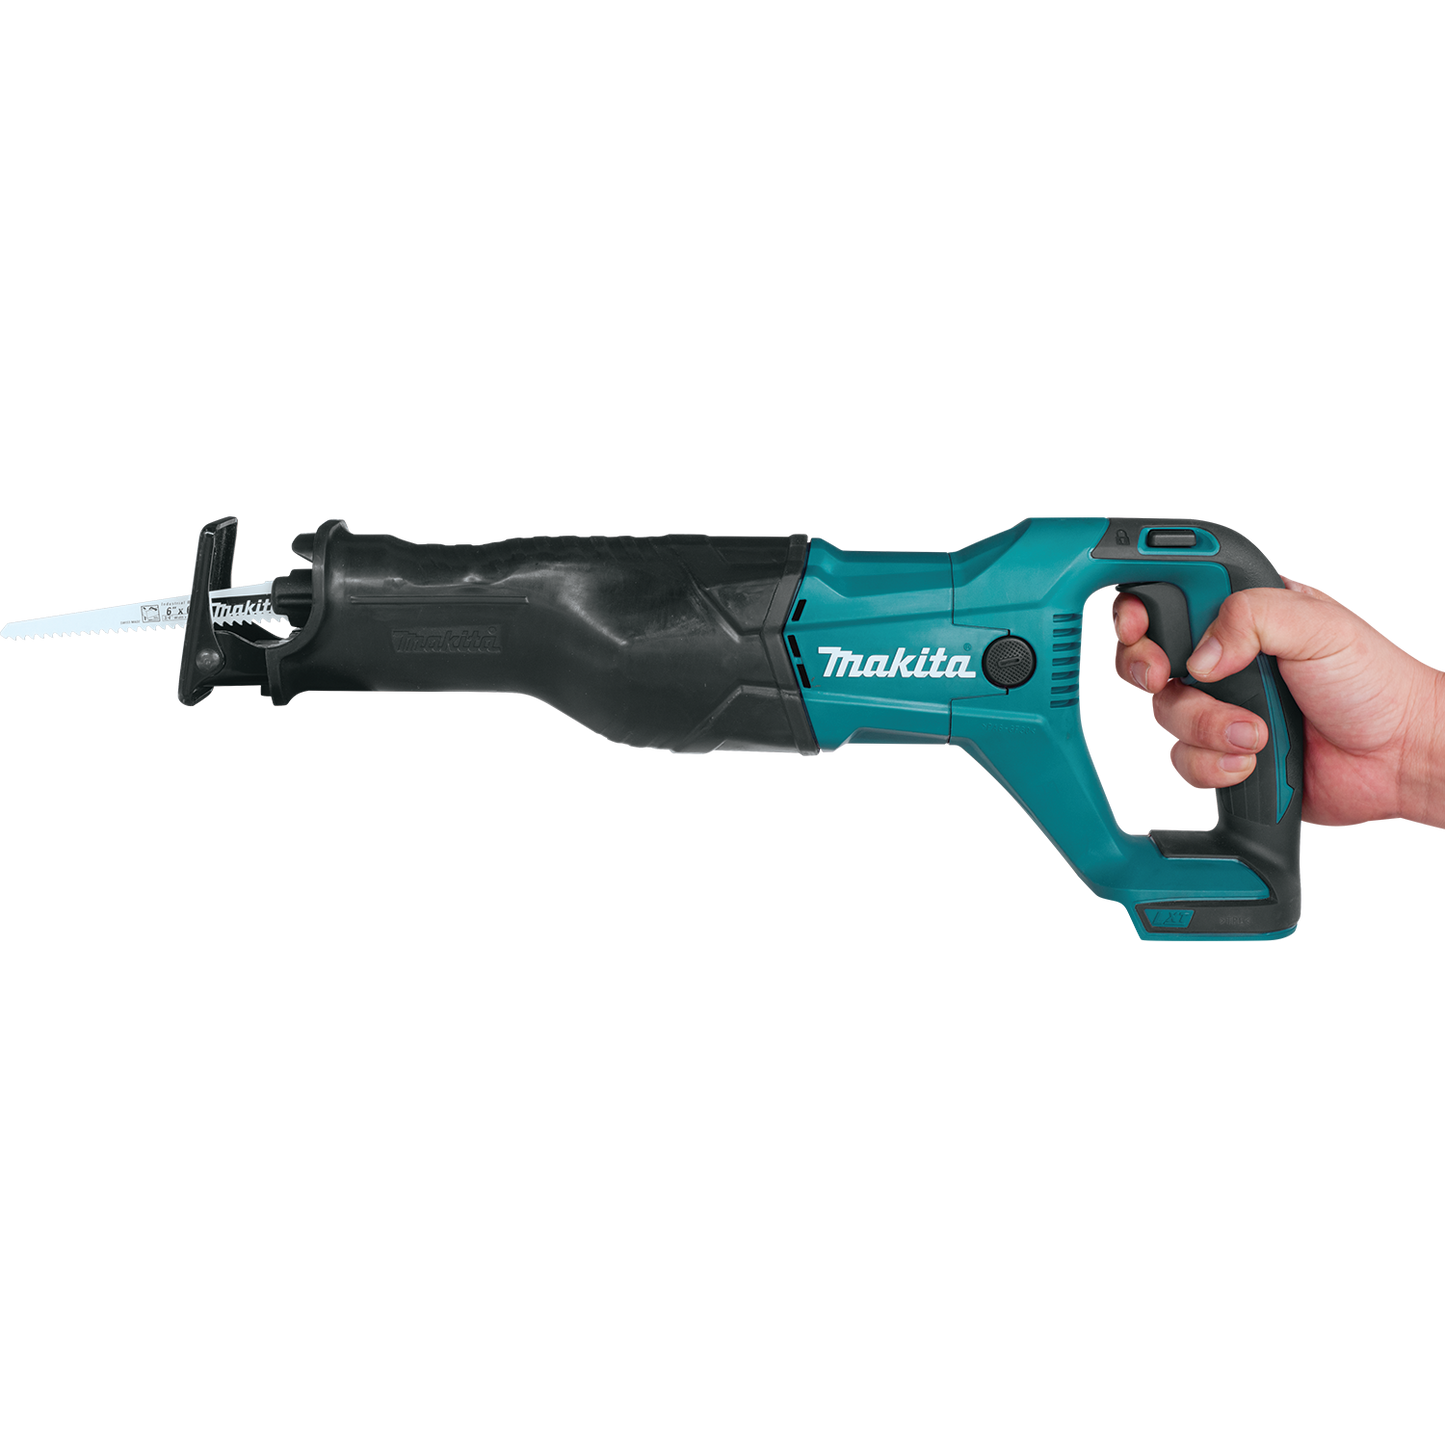 Makita 18 Volt LXT Lithium Ion Cordless Reciprocatiog Saw Factory Serviced (Tool Only)